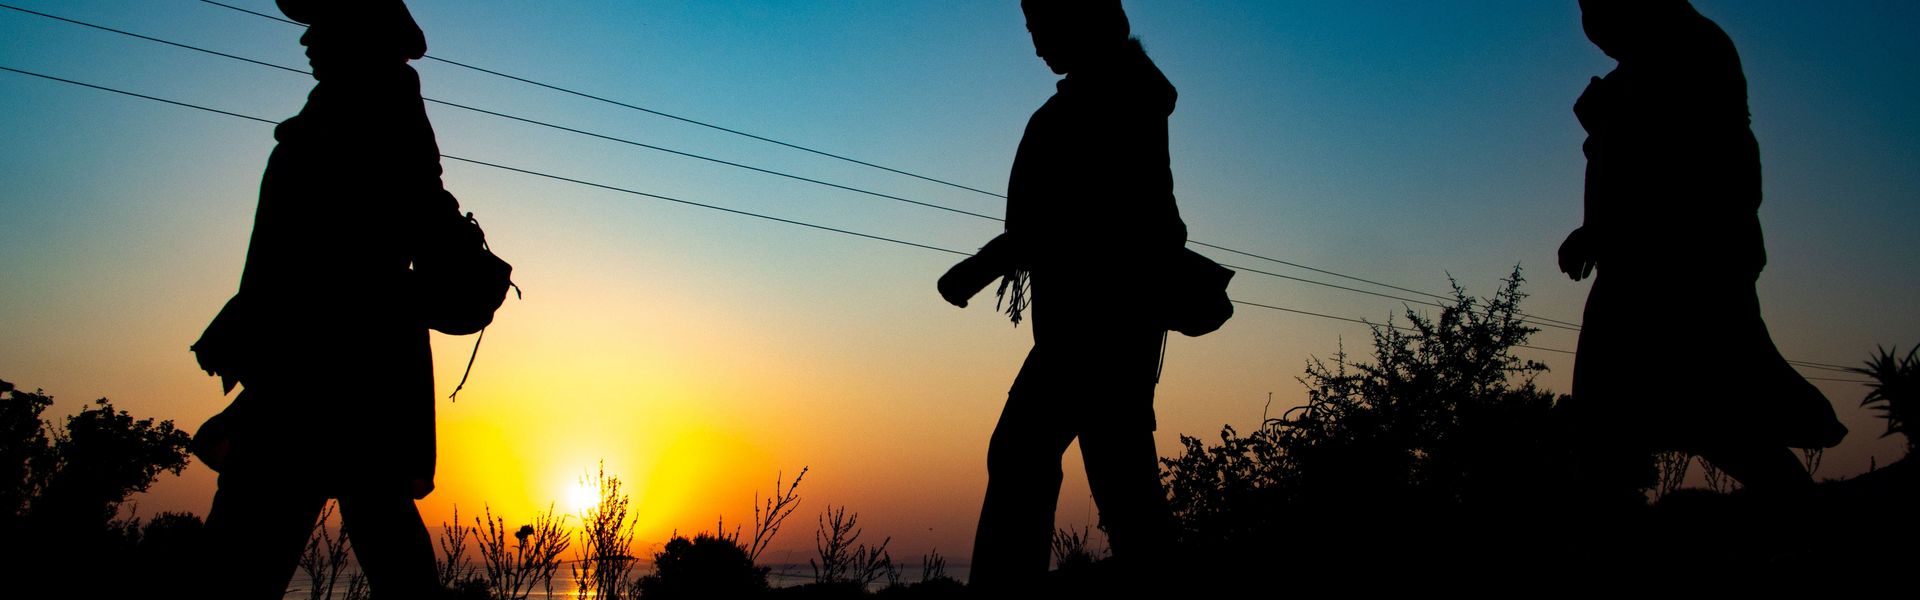 Silhouettes Of Walking Refugees In The Dawn.